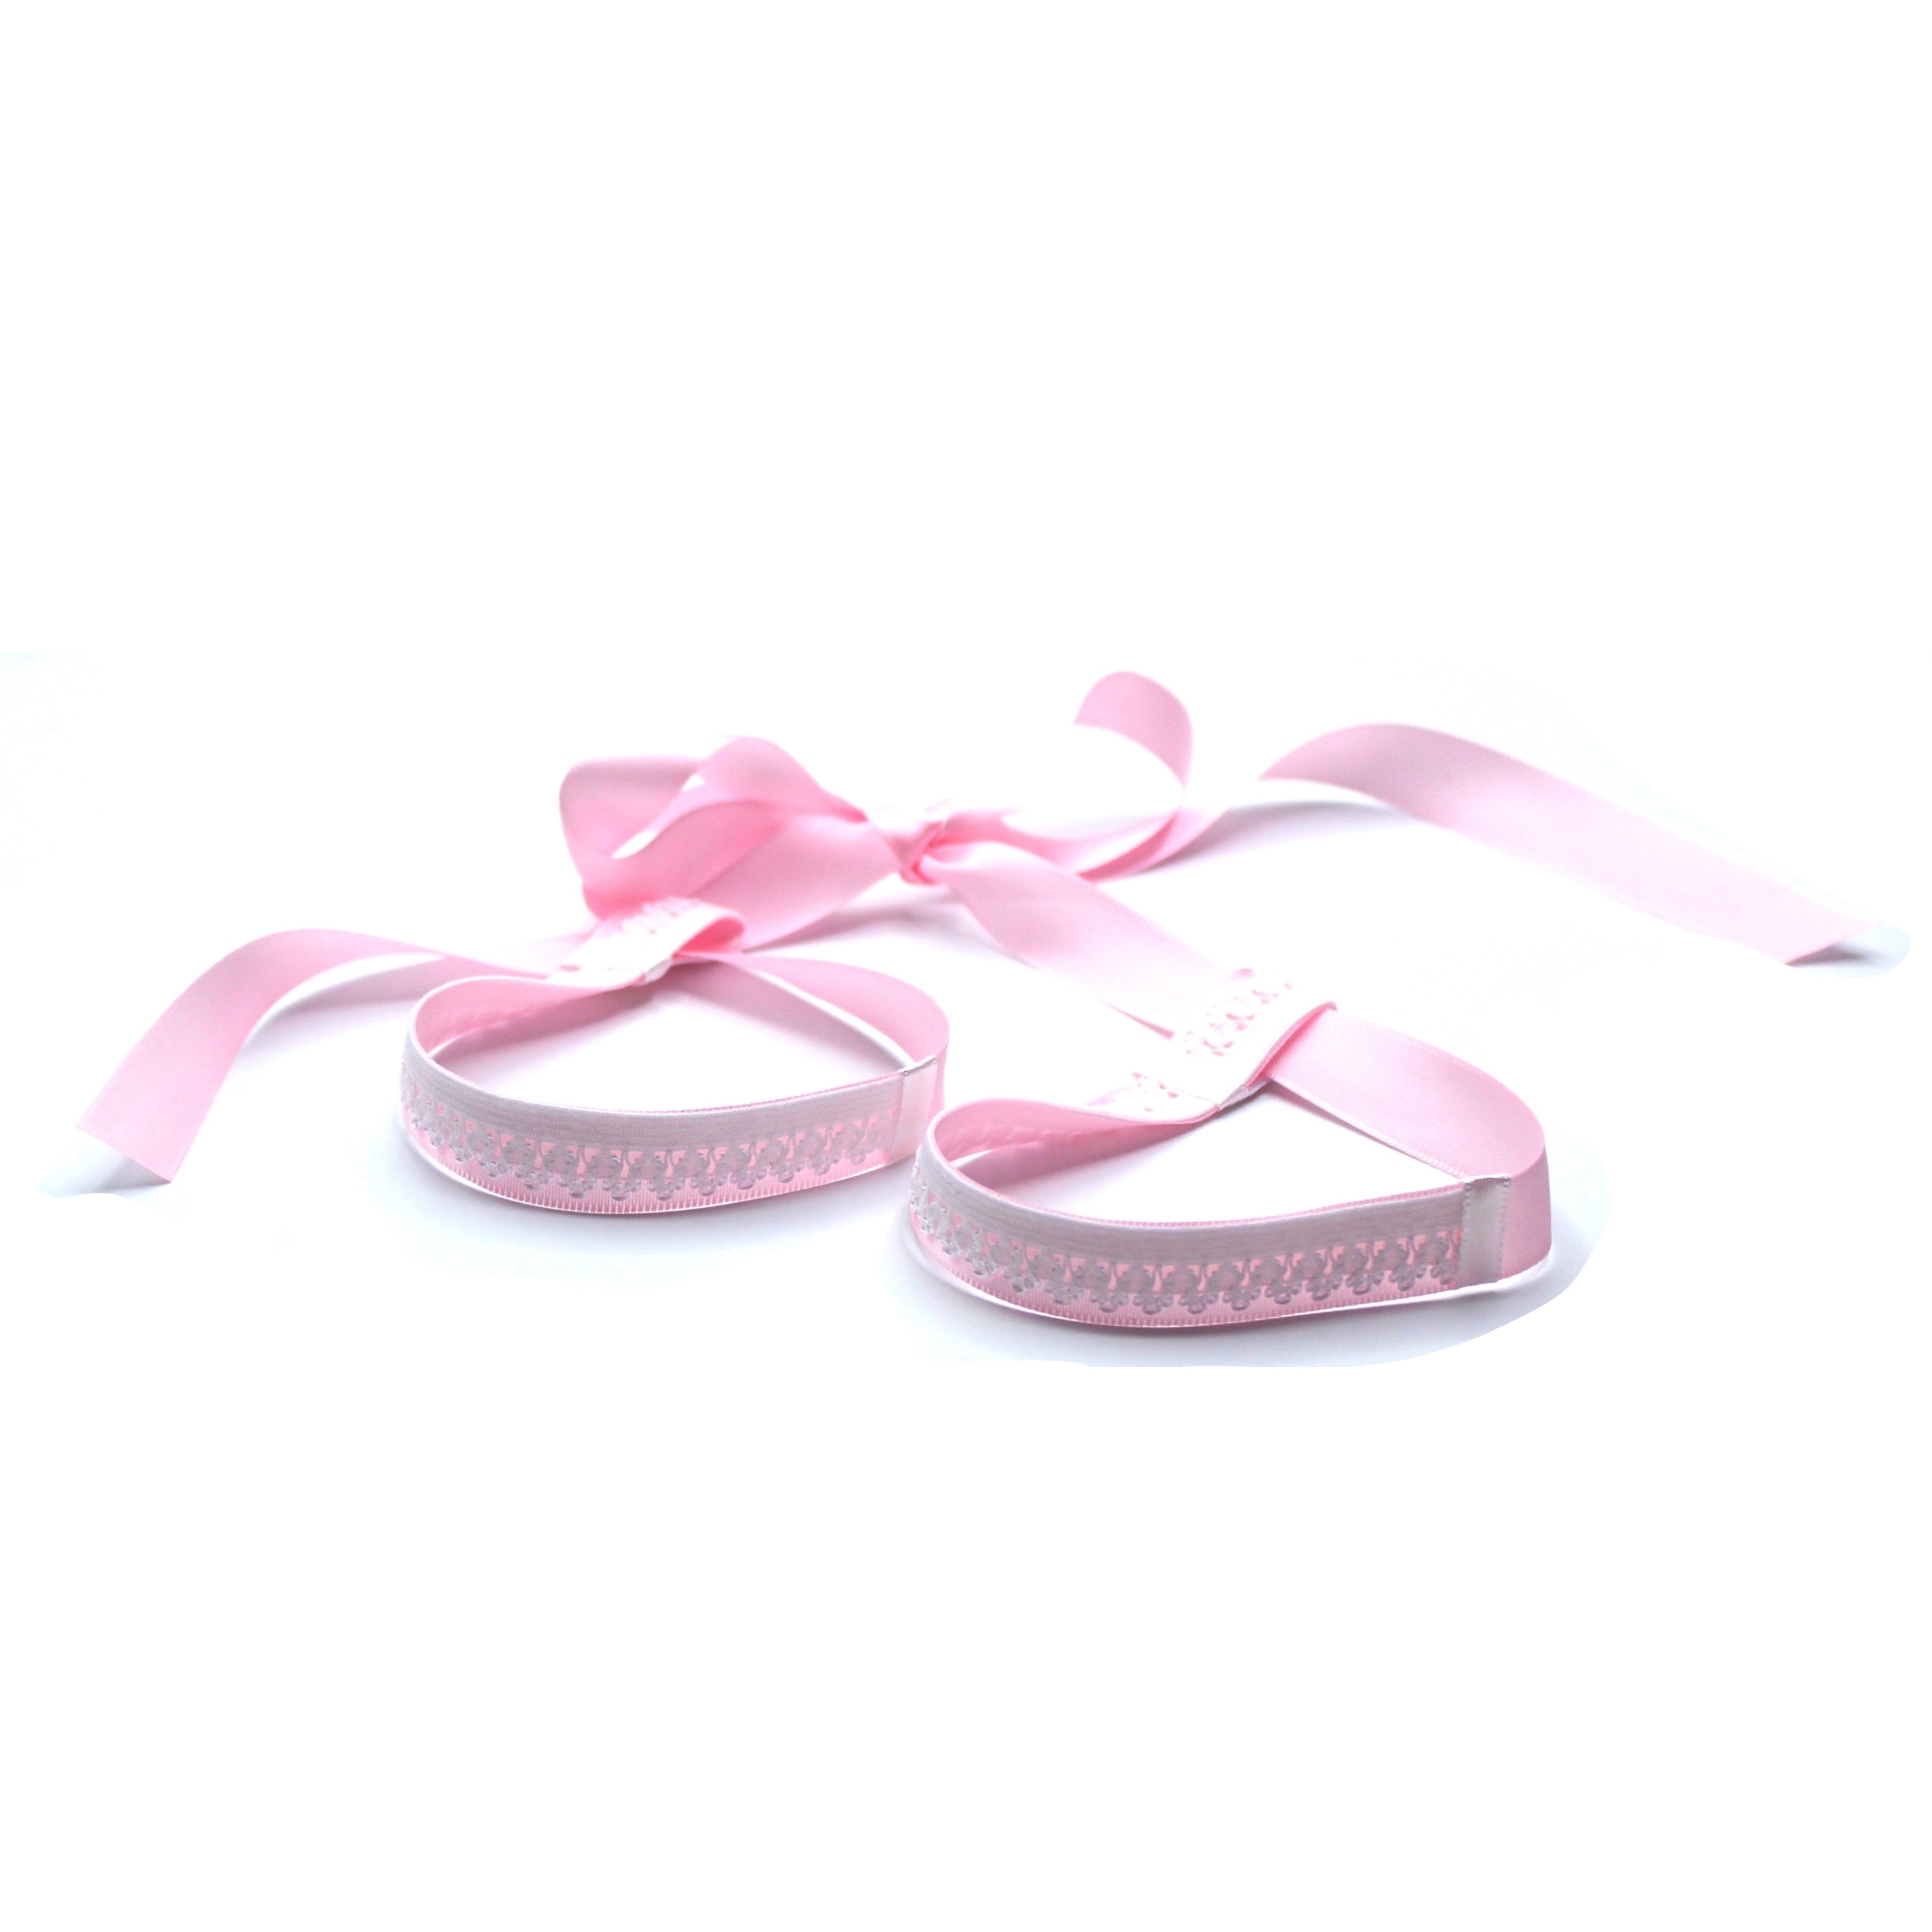 White and Pink Lace Handcuffs